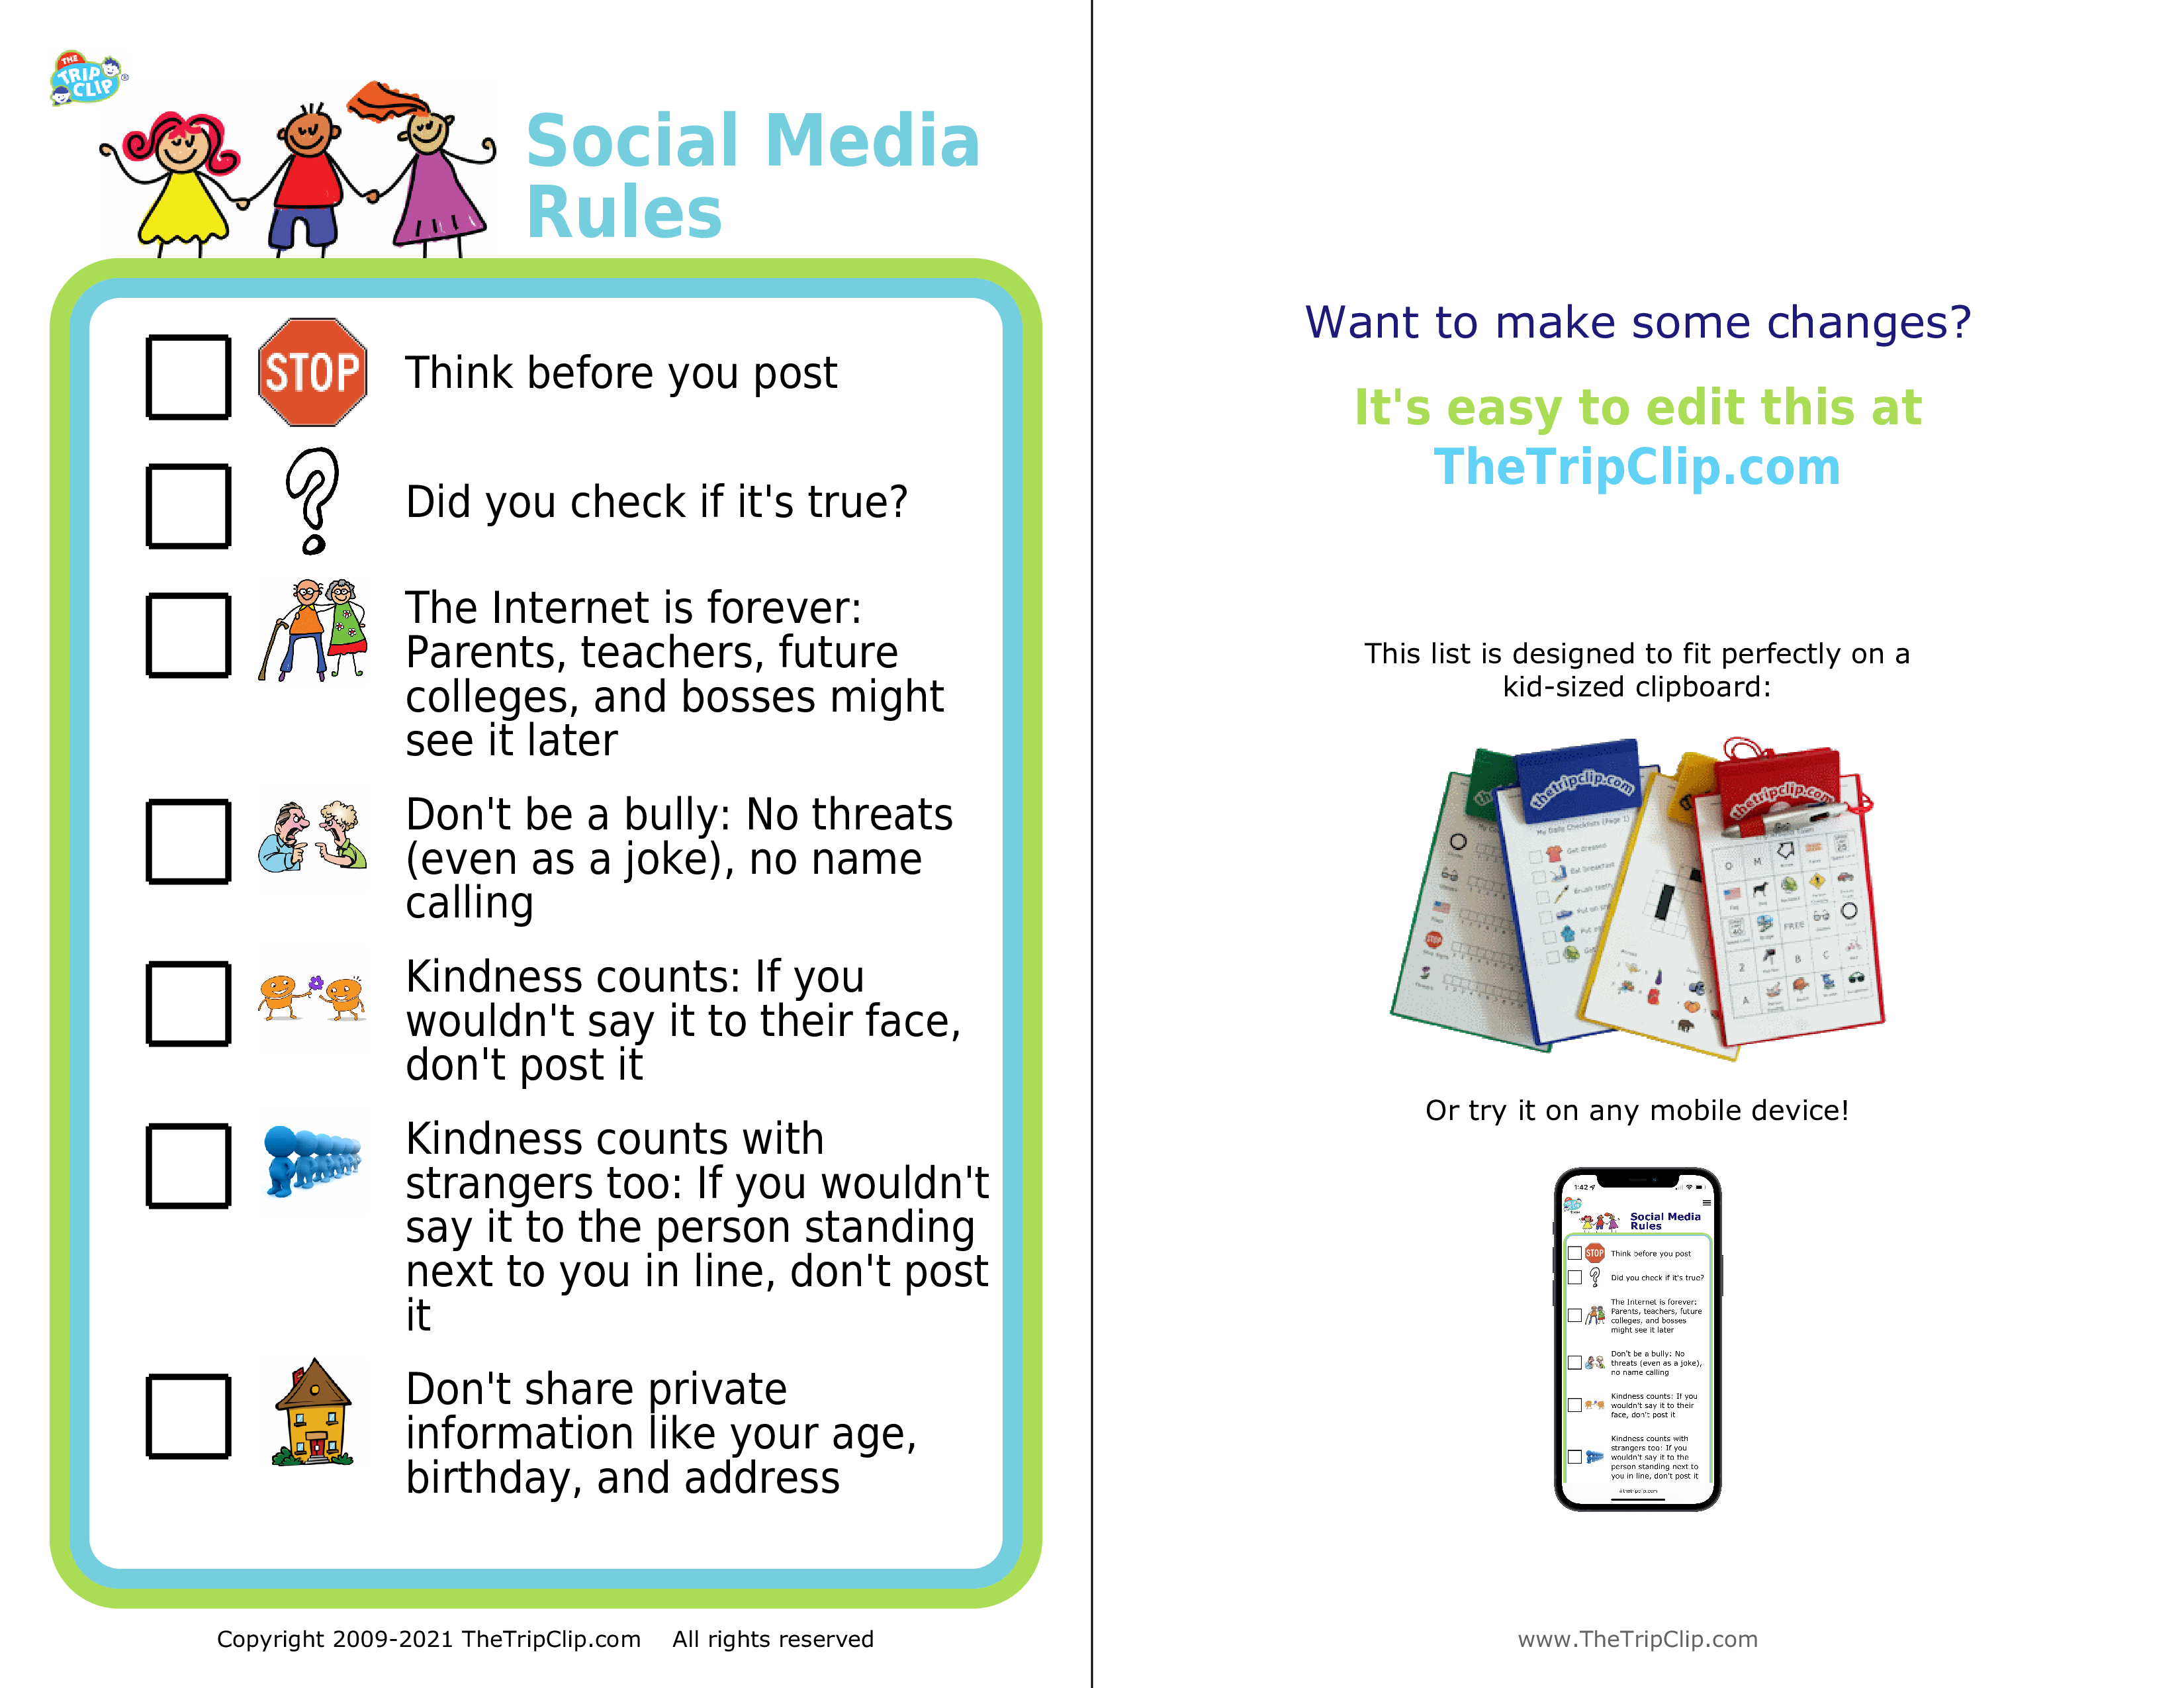 Picture checklist showing social media rules